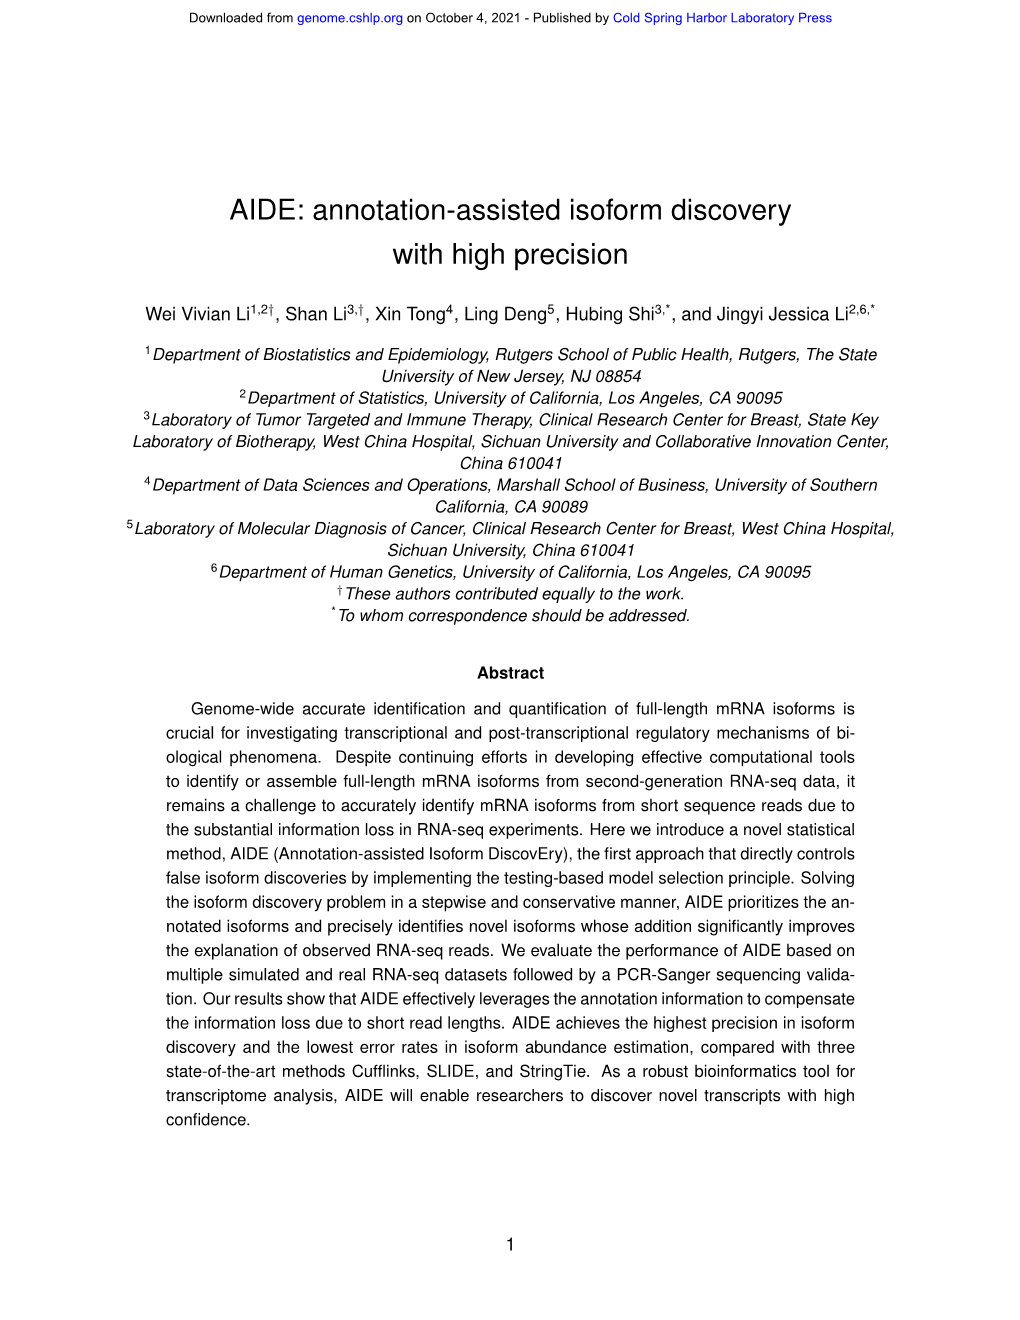 AIDE: Annotation-Assisted Isoform Discovery with High Precision